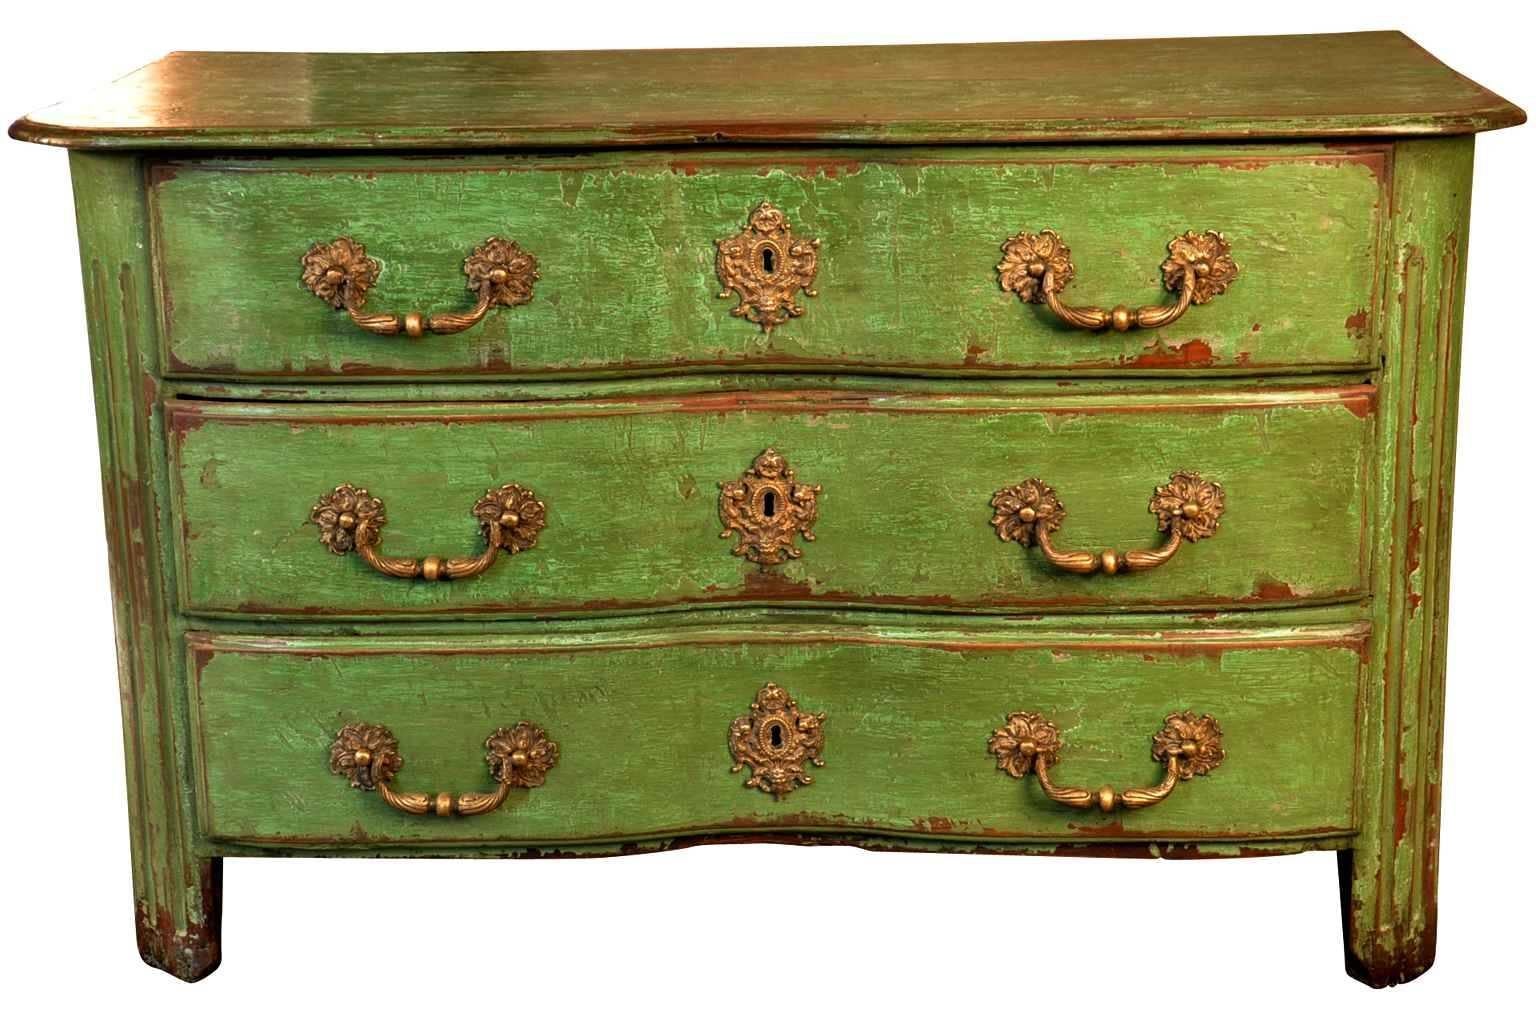 French 18th century Louis XIV Arbalete commode in painted wood. Handsomely constructed with shaped top surface, fluted frame members, molded side panels and original bronze hardware. Fabulous painted finish with rich patina and texture.